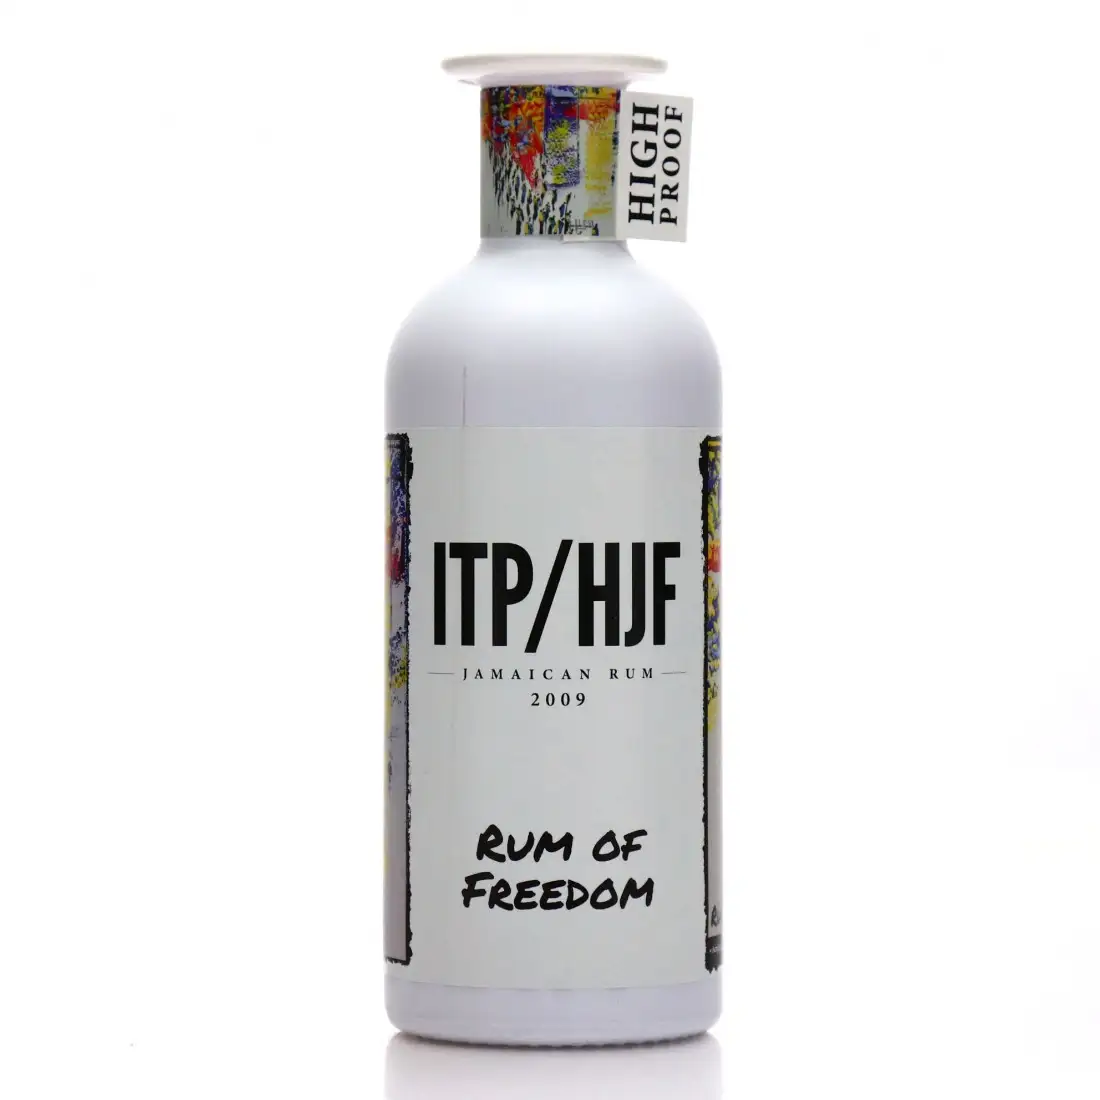 Image of the front of the bottle of the rum ITP / HJF (Rum of Freedom)